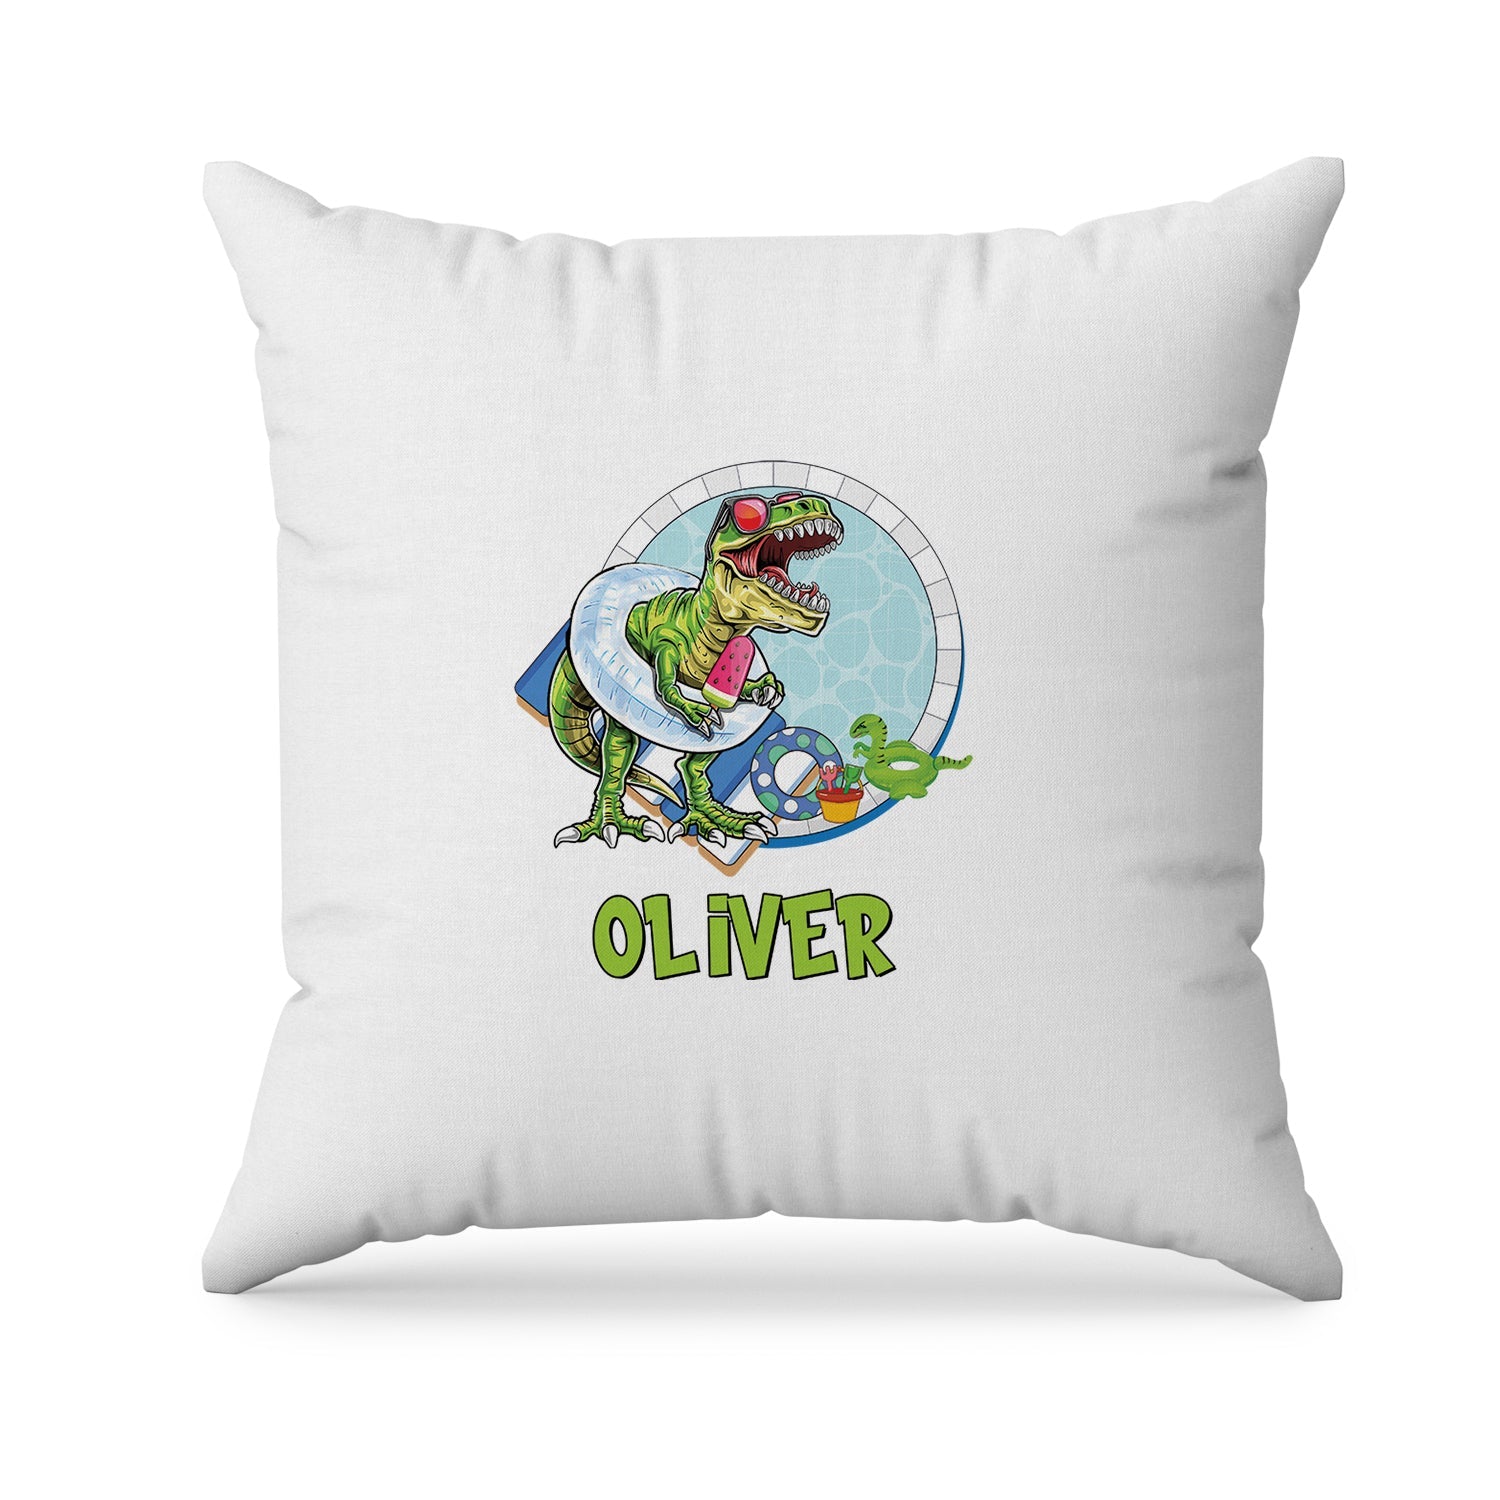 Personalized dinosaur pillowcase for sublimation printing